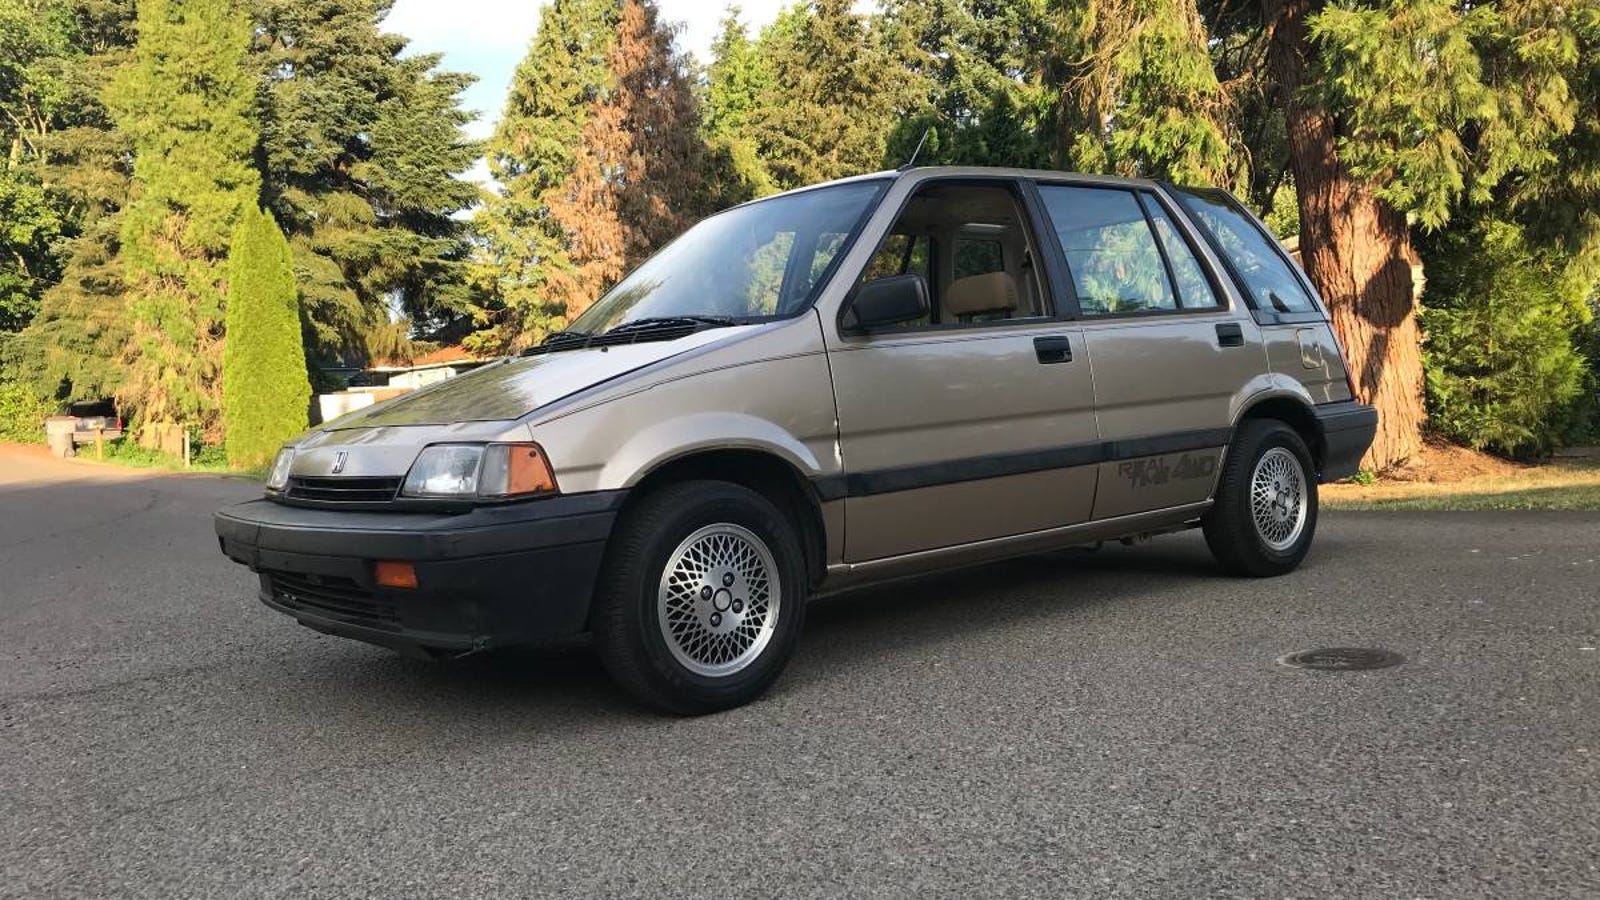 For $2,000, Could This 1987 Honda Civic Real Time 4WD Wagovan Be The Real Deal?